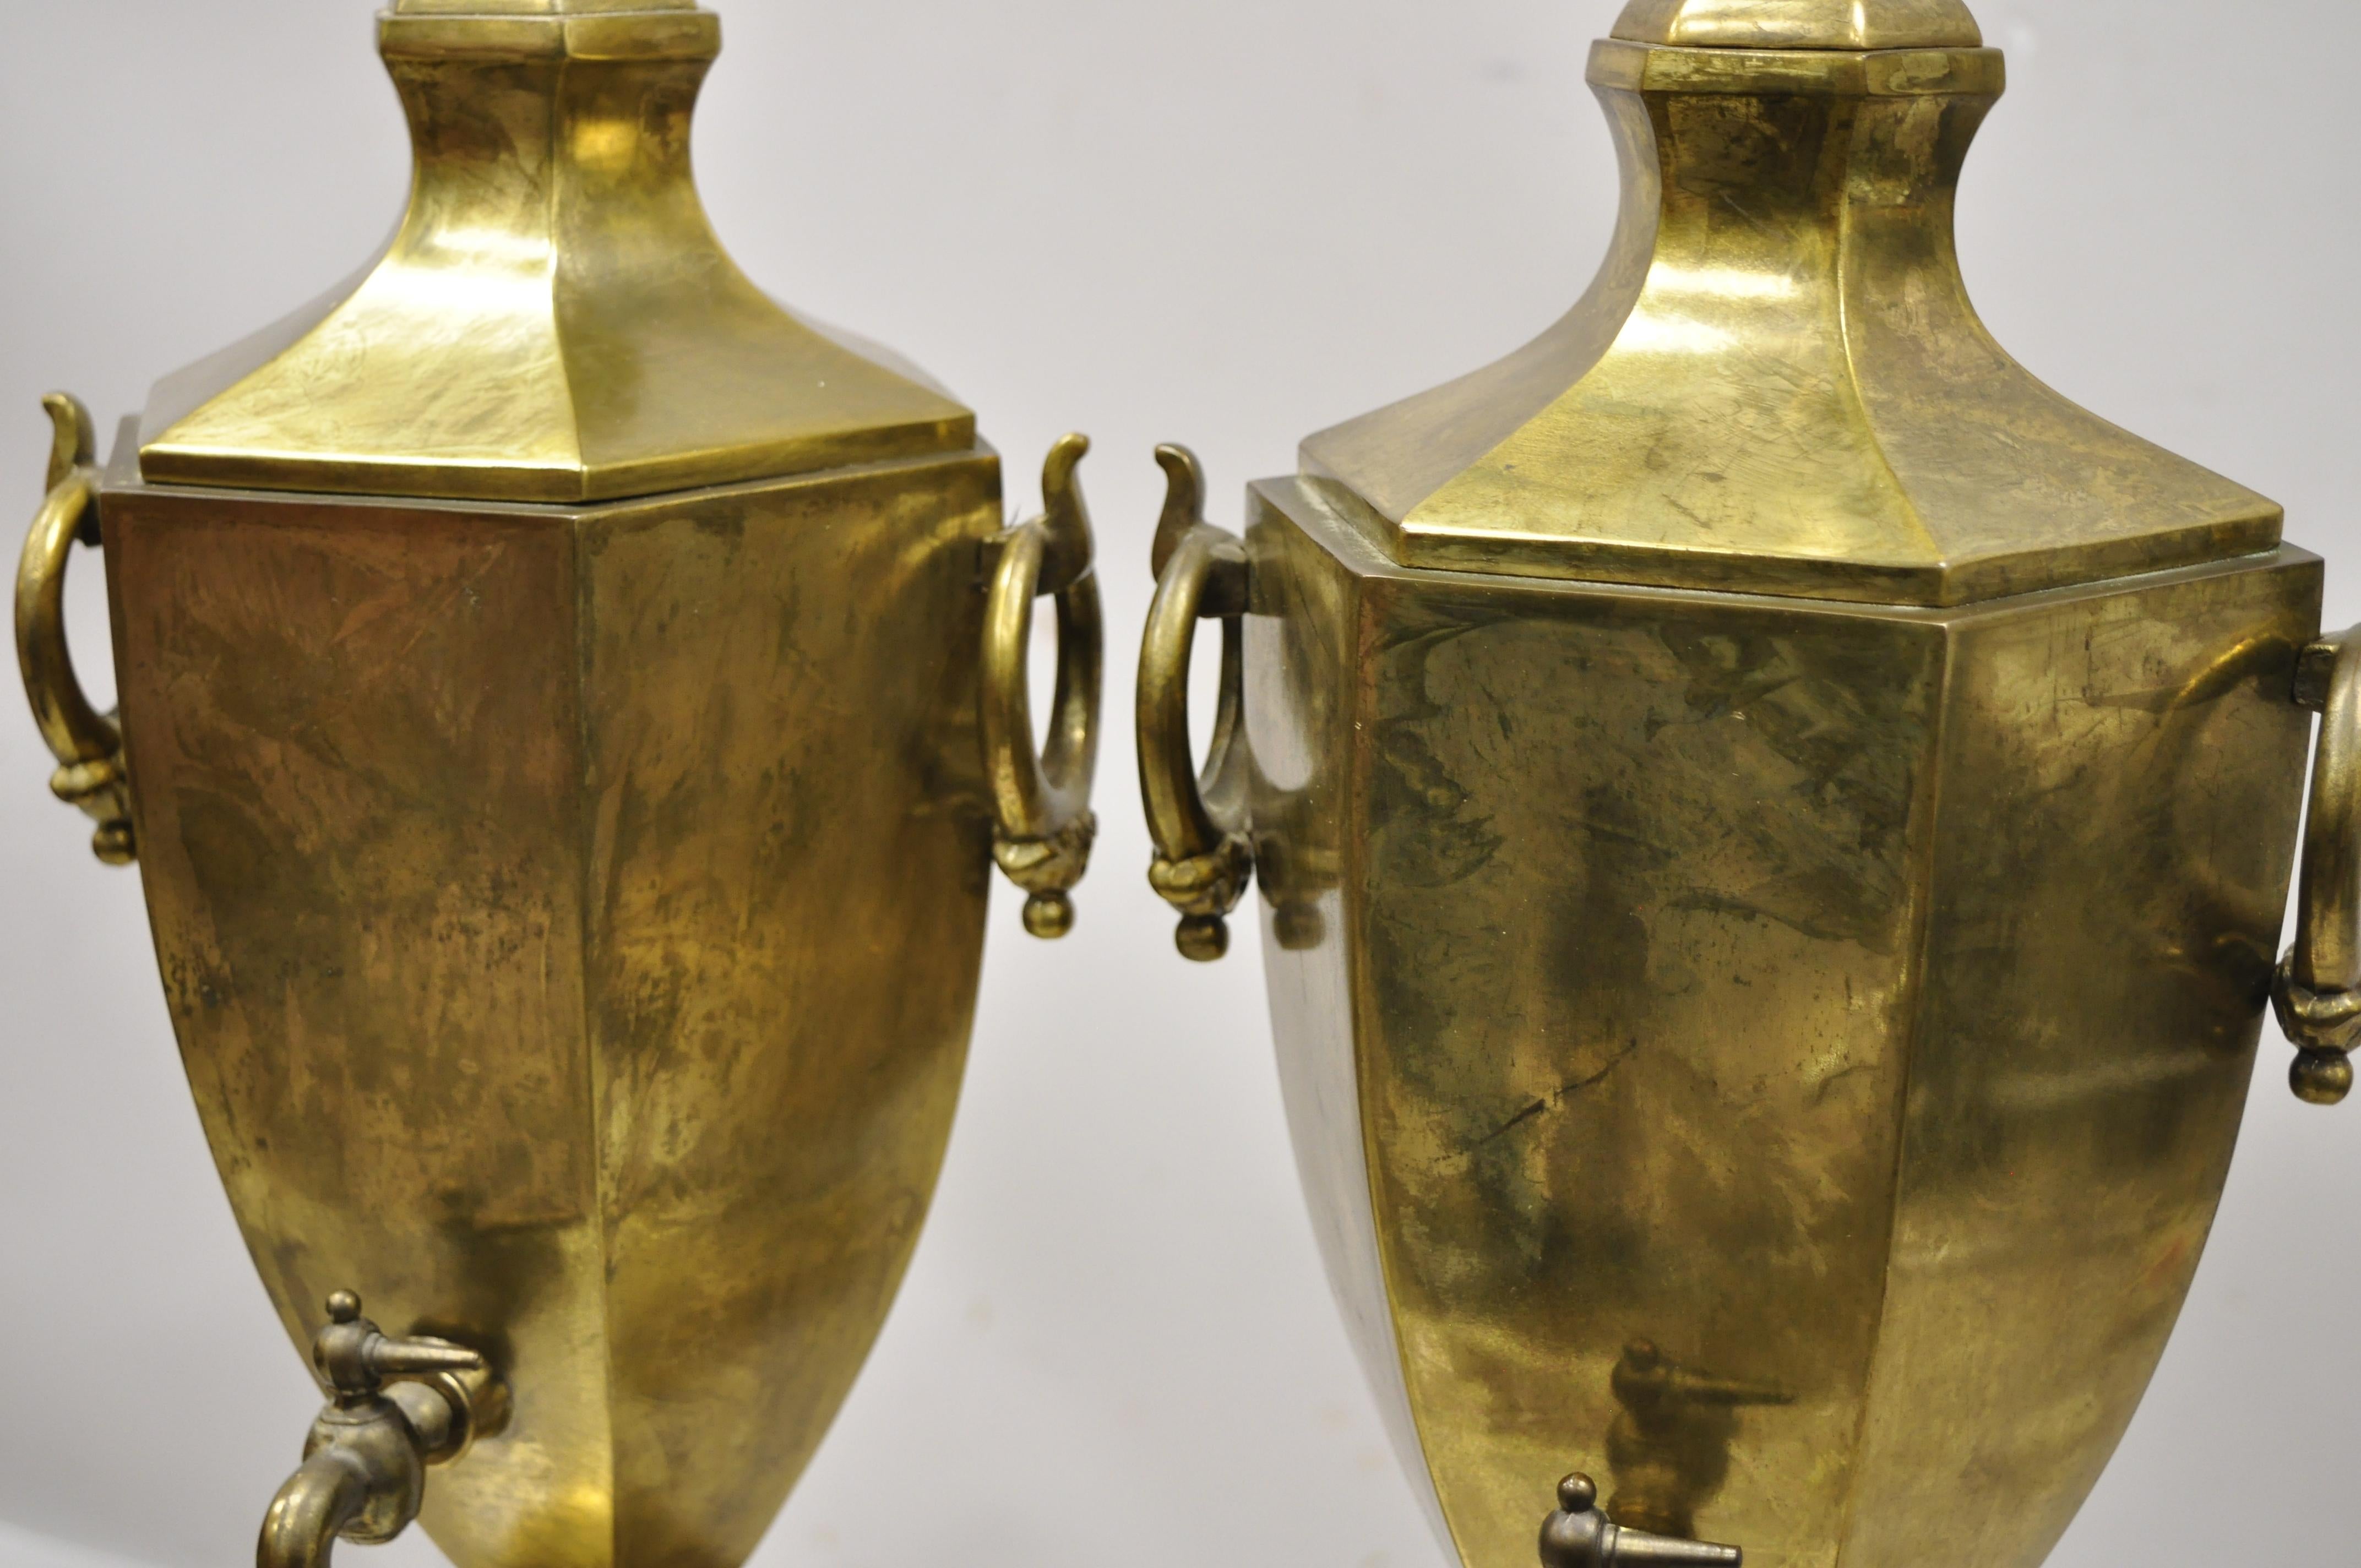 Paul Hanson Burnished Brass Samovar Urn Form Table Lamps with Shades - a Pair In Good Condition For Sale In Philadelphia, PA